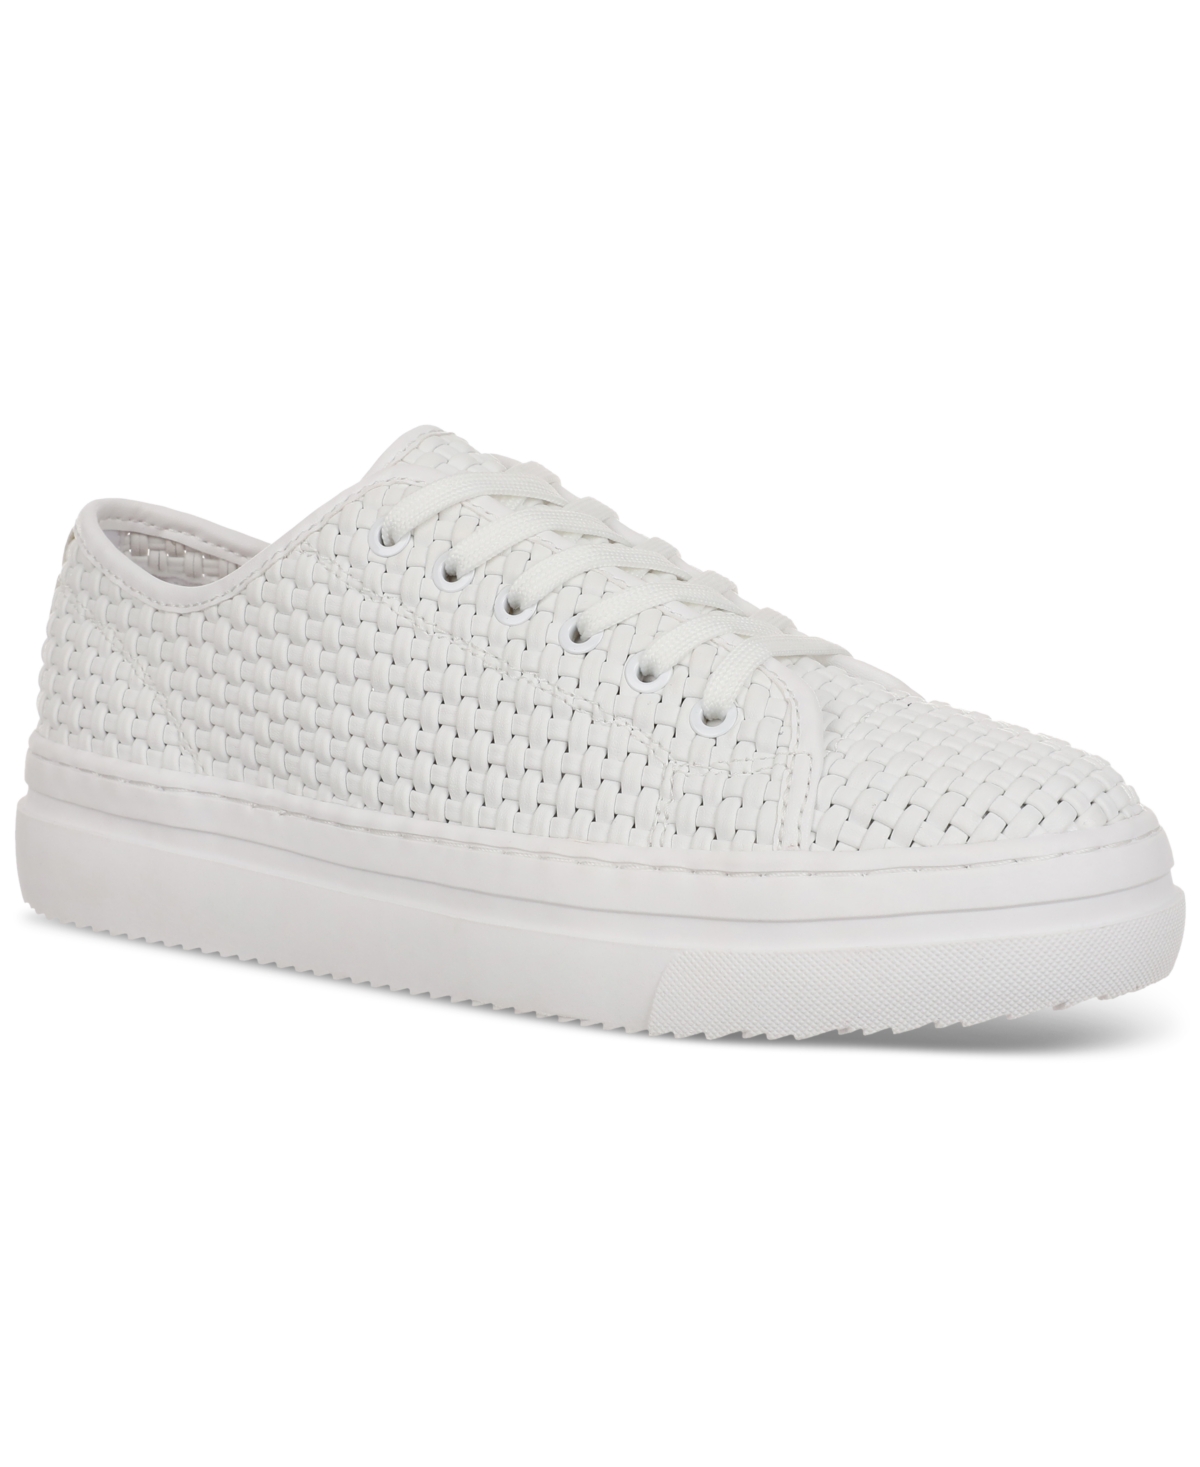 Women's Lusille Woven Lace-Up Sneakers, Created for Macy's - White